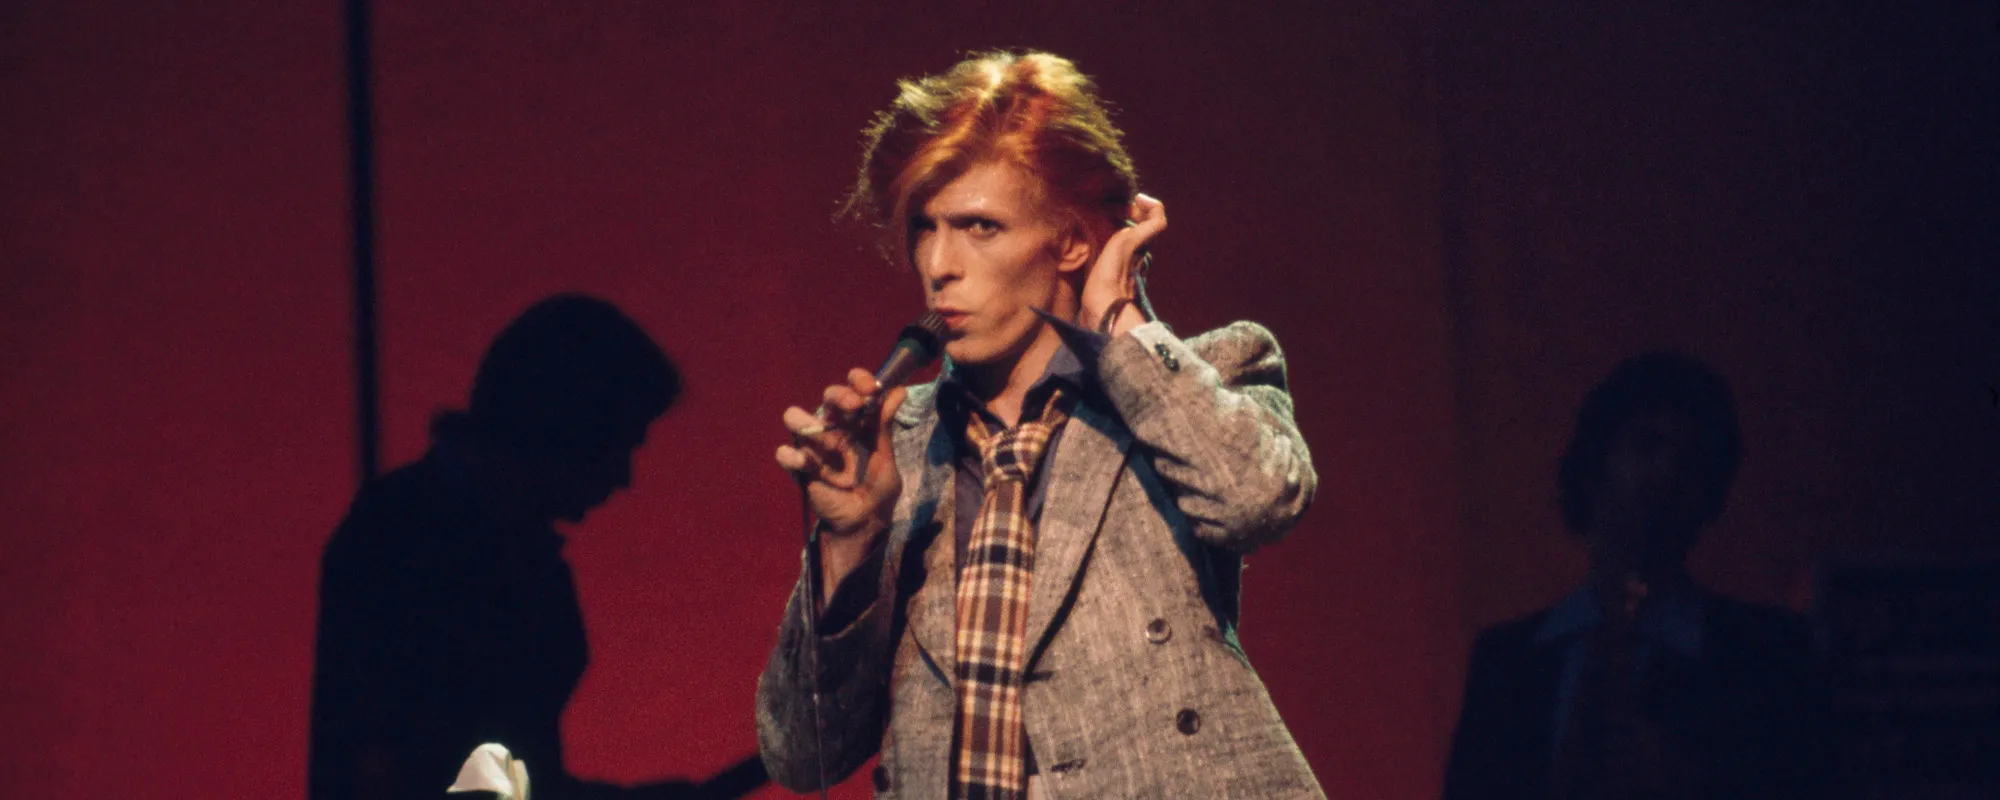 As ‘Diamond Dogs’ Turns 50, the Meaning Behind “Rebel Rebel” by David Bowie